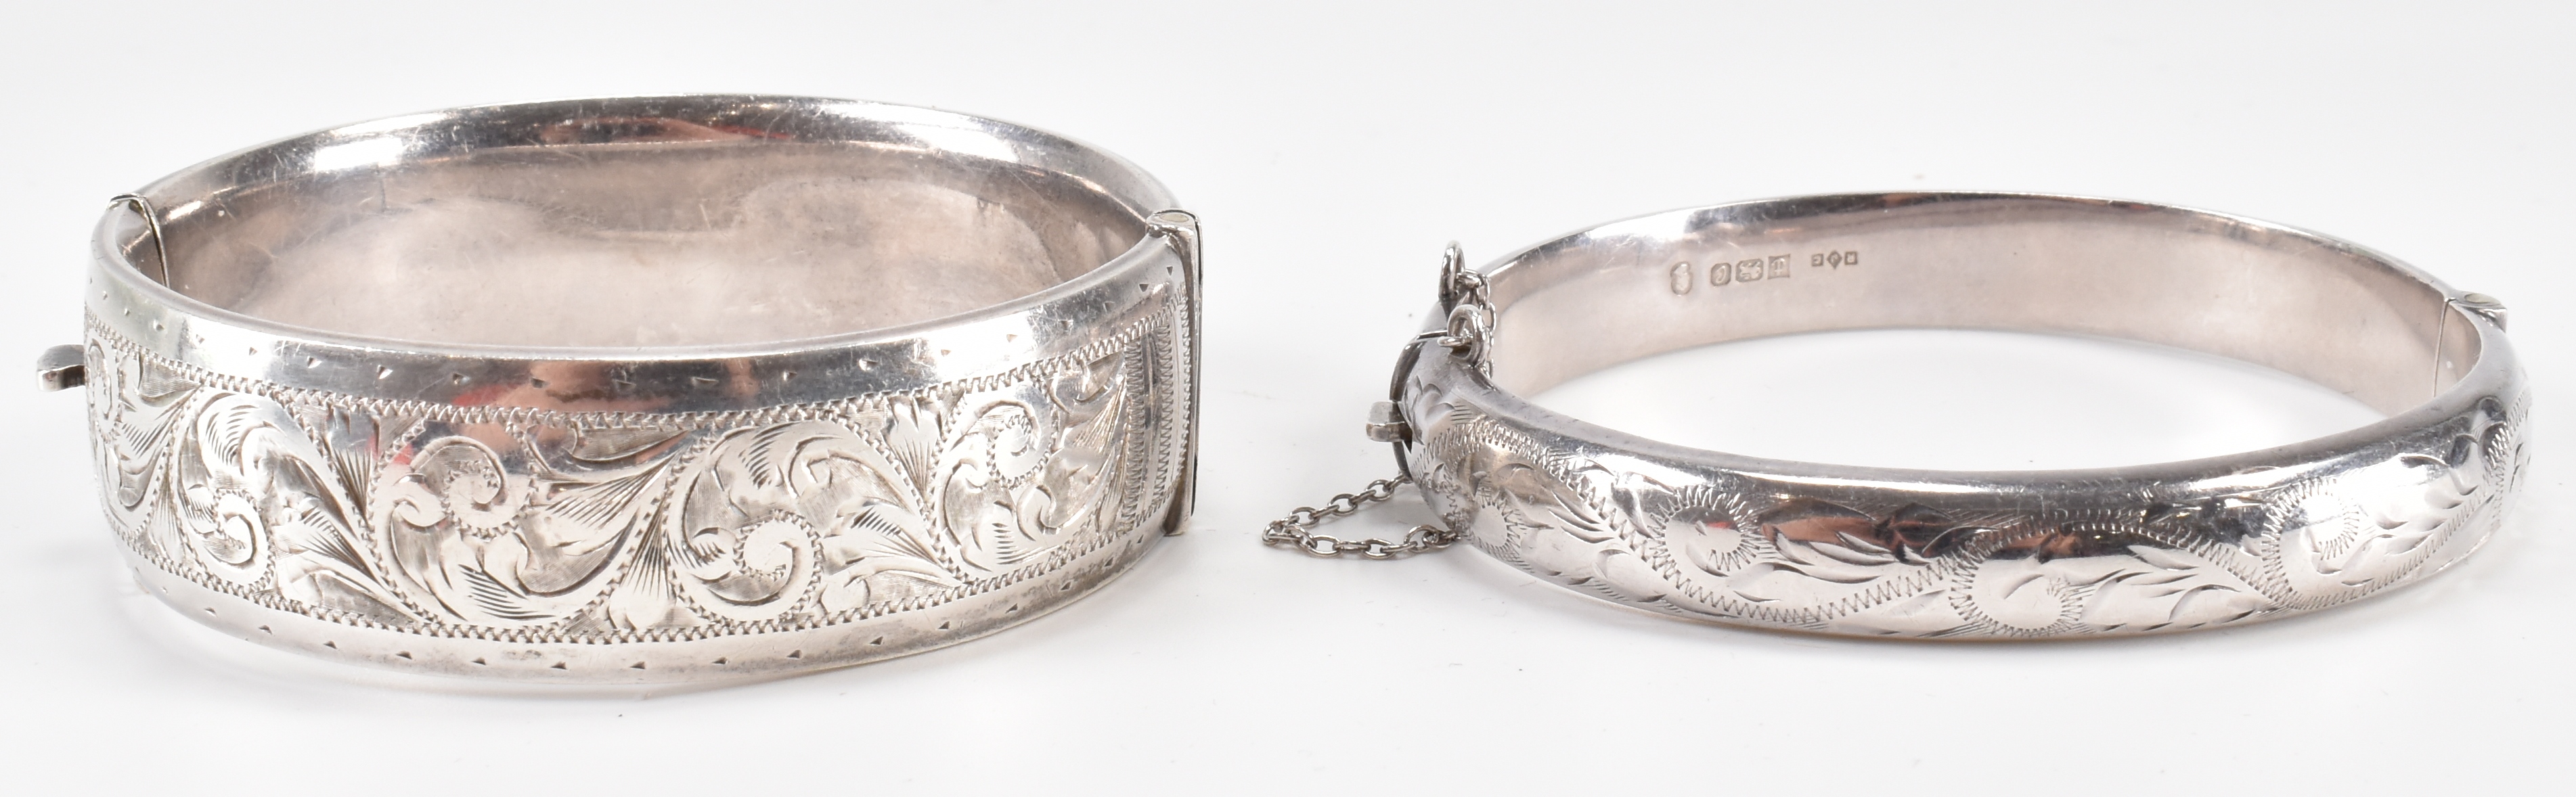 TWO VINTAGE HALLMARKED 925 SILVER BANGLES